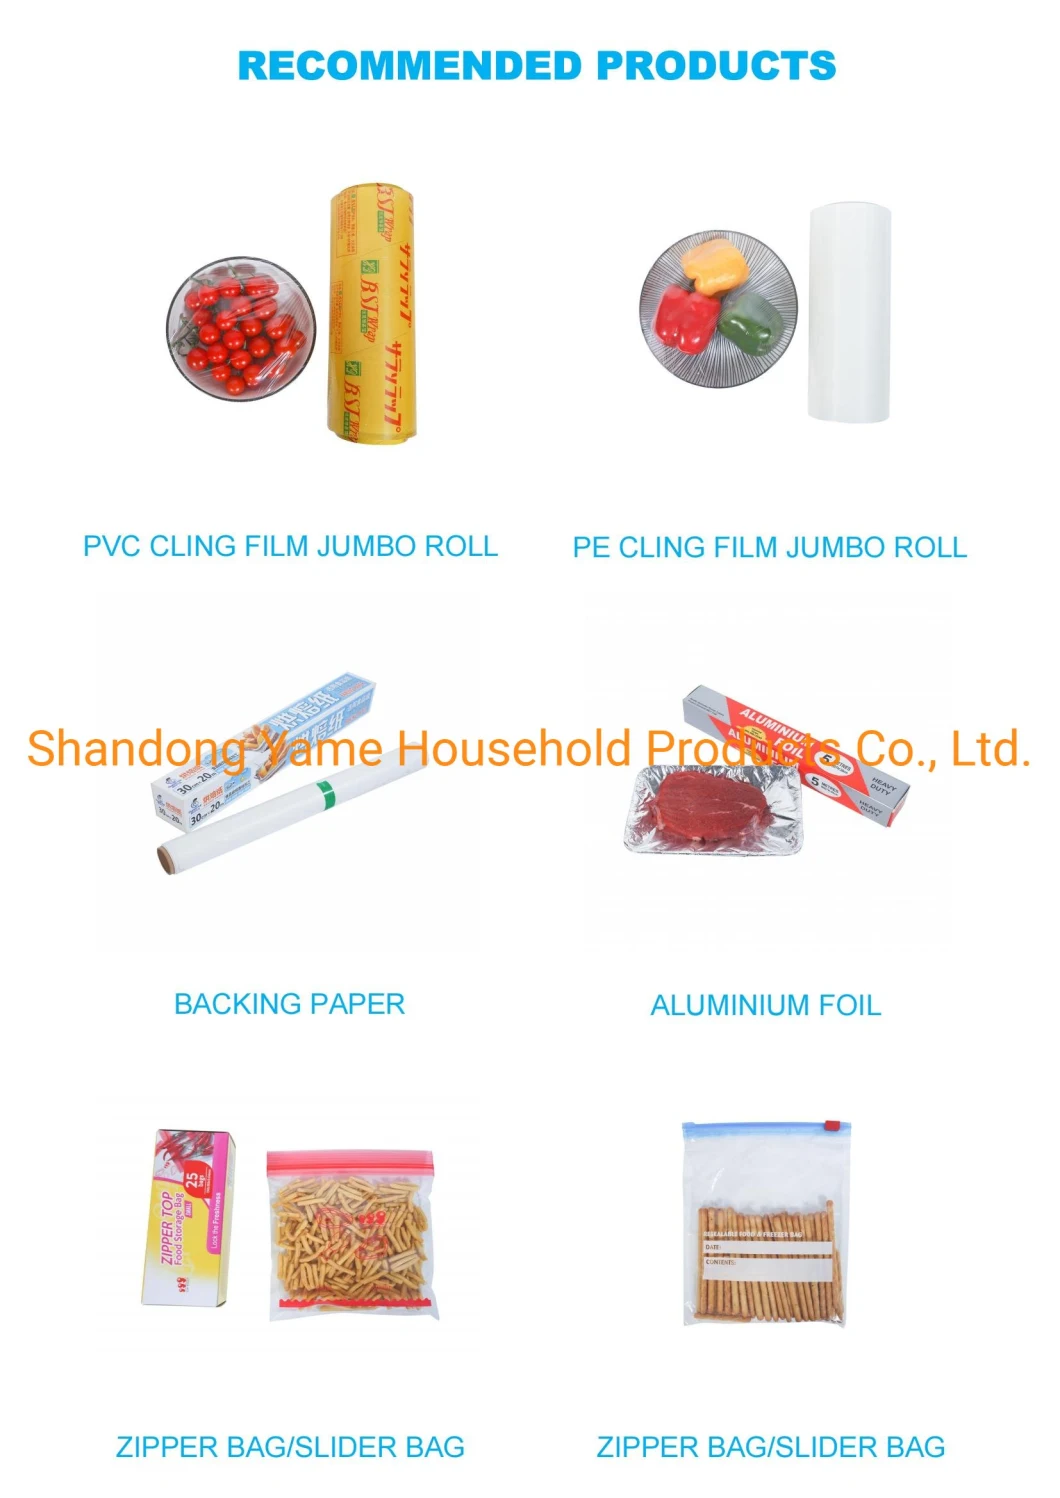 High Quality PEVA Storage Food Bags Standing Freezer Storage Bags with Zipper